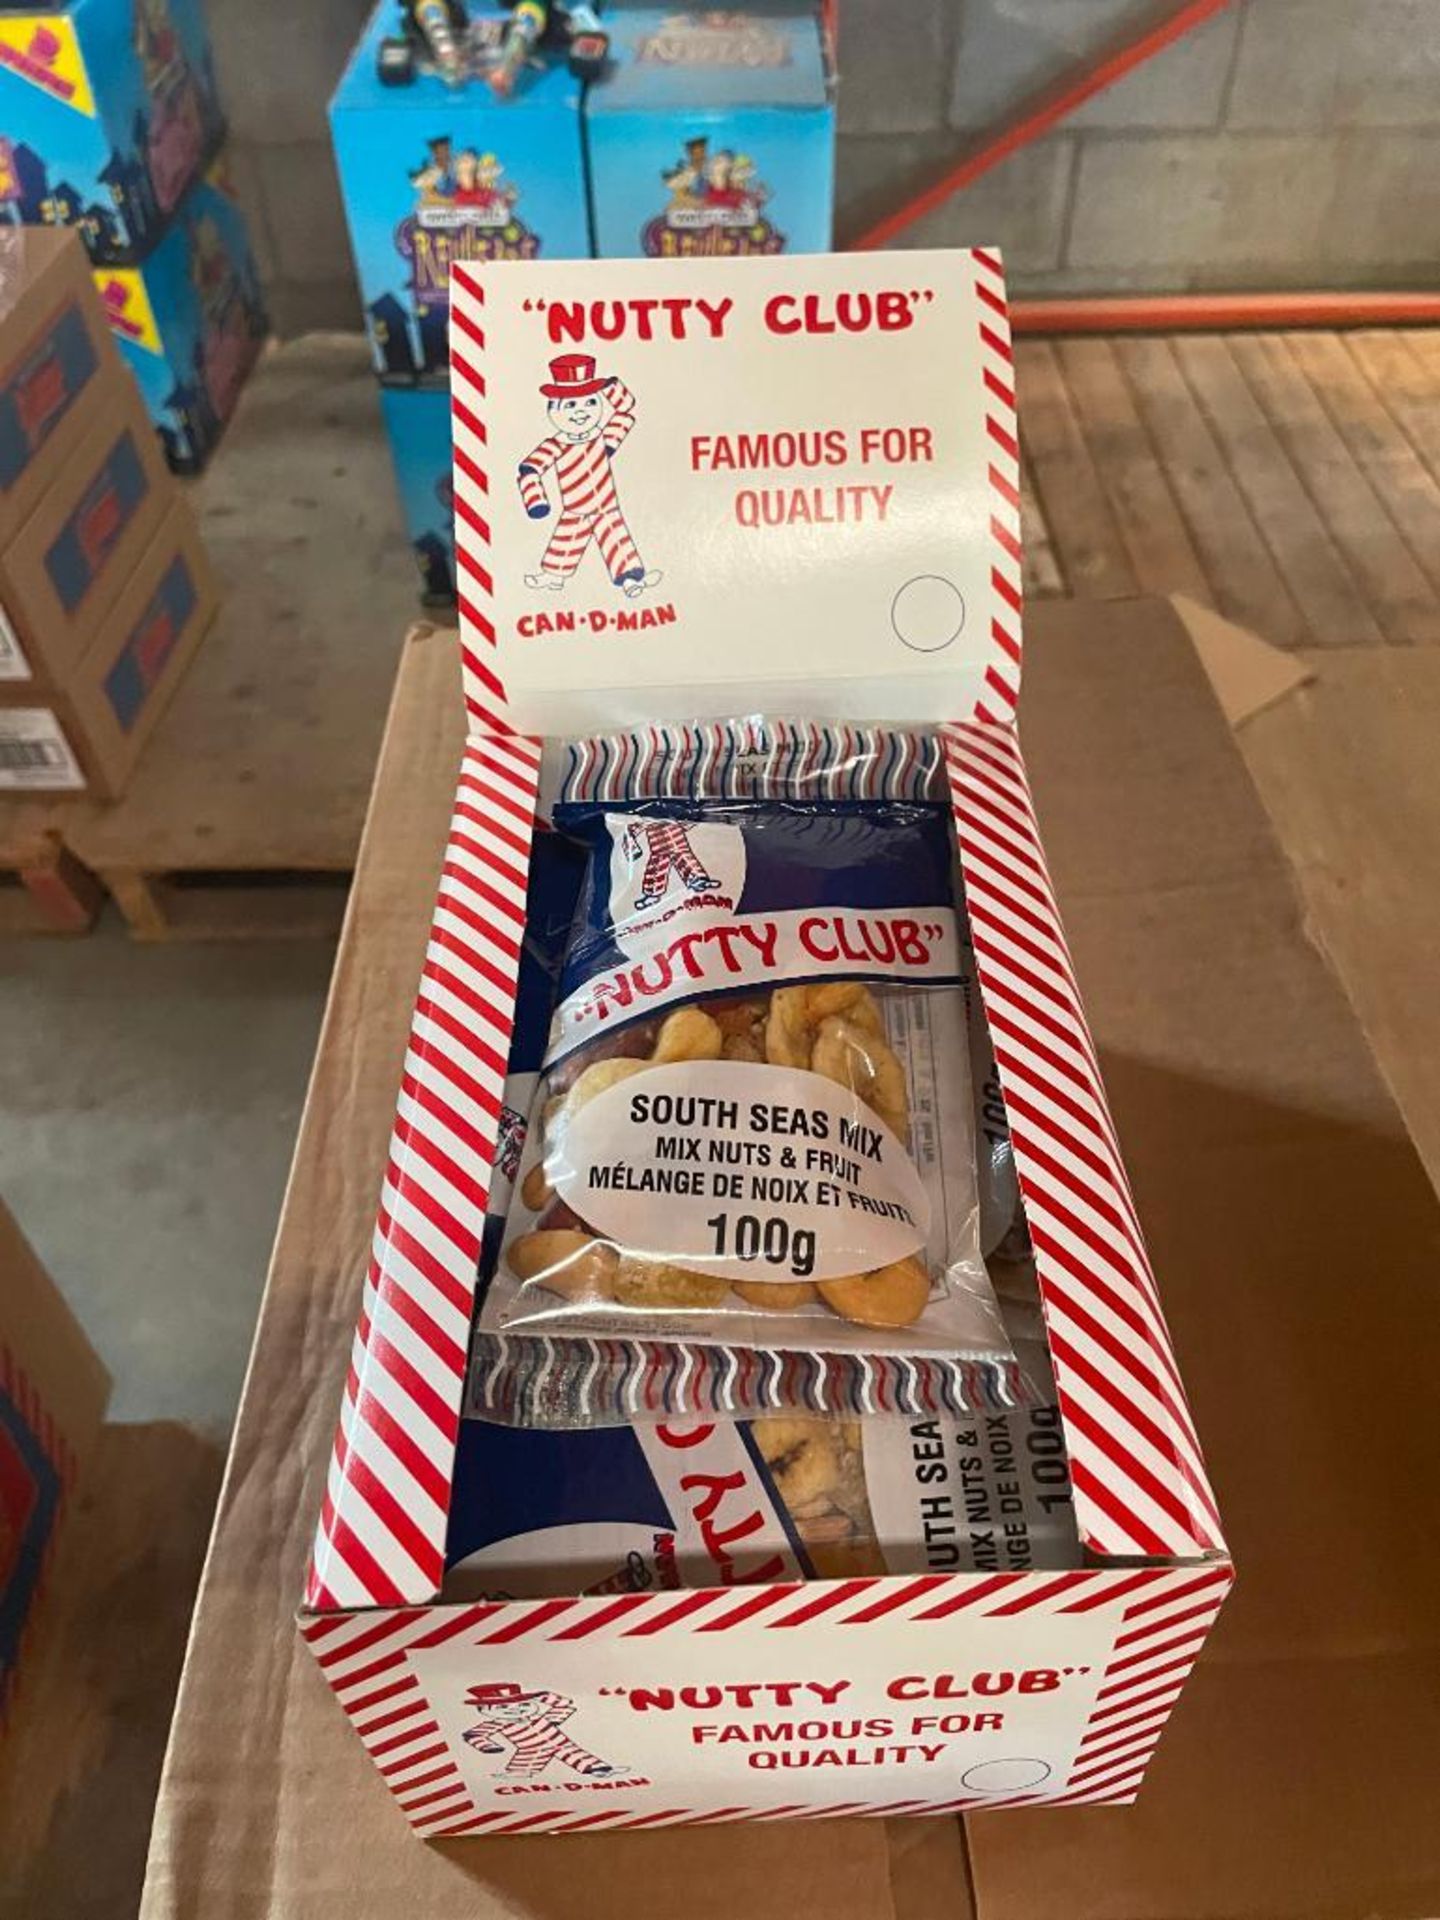 (2) CASES OF NUTTY CLUB SOUTH SEAS MIX, 12/12/100G PER CASE - Image 2 of 3